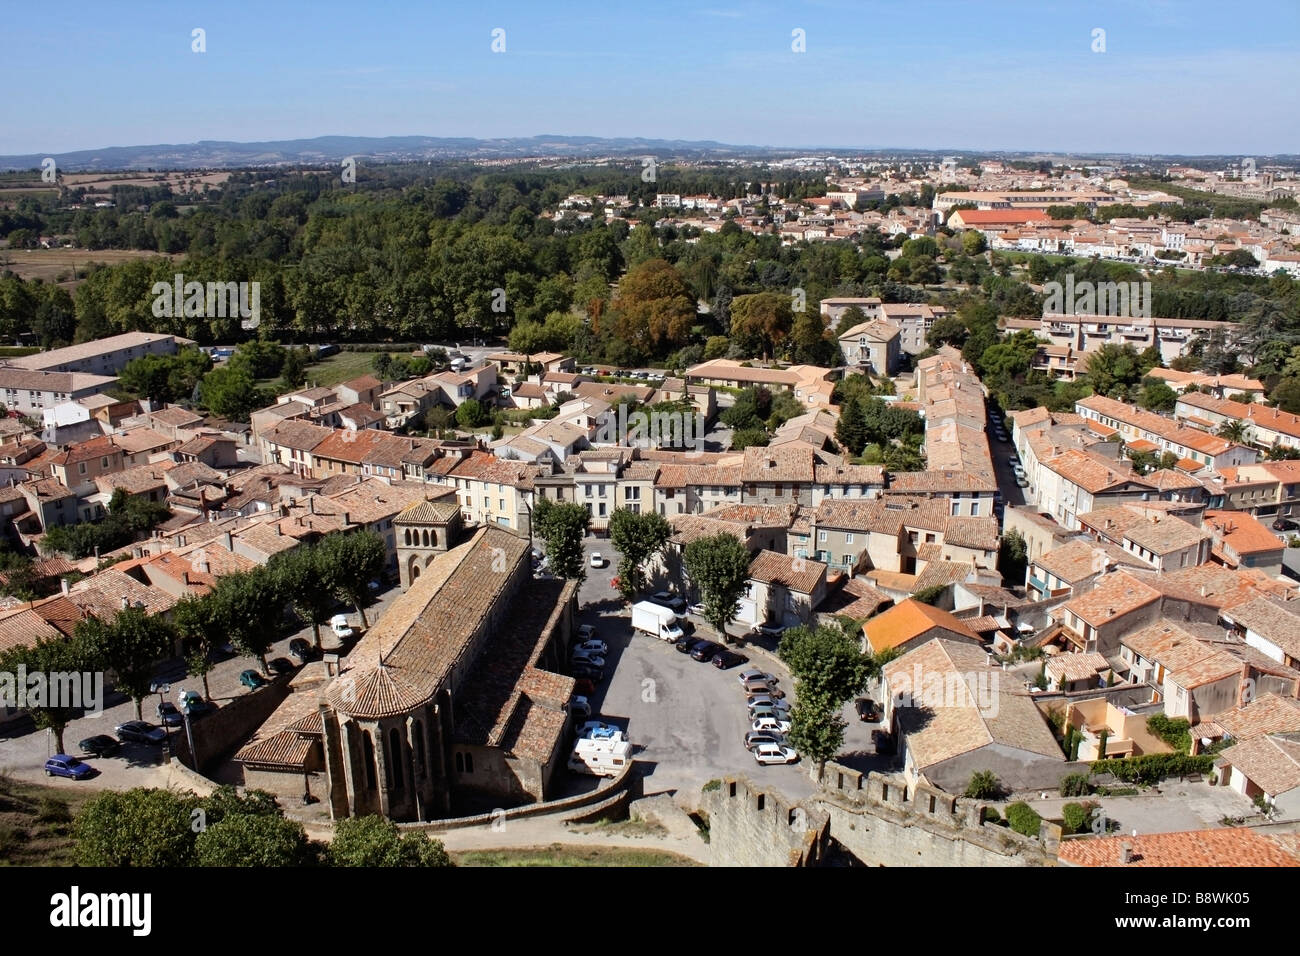 View of old city from the ramparts of the Chateau Comtal, Carcassonne, Languedoc, France Stock Photo